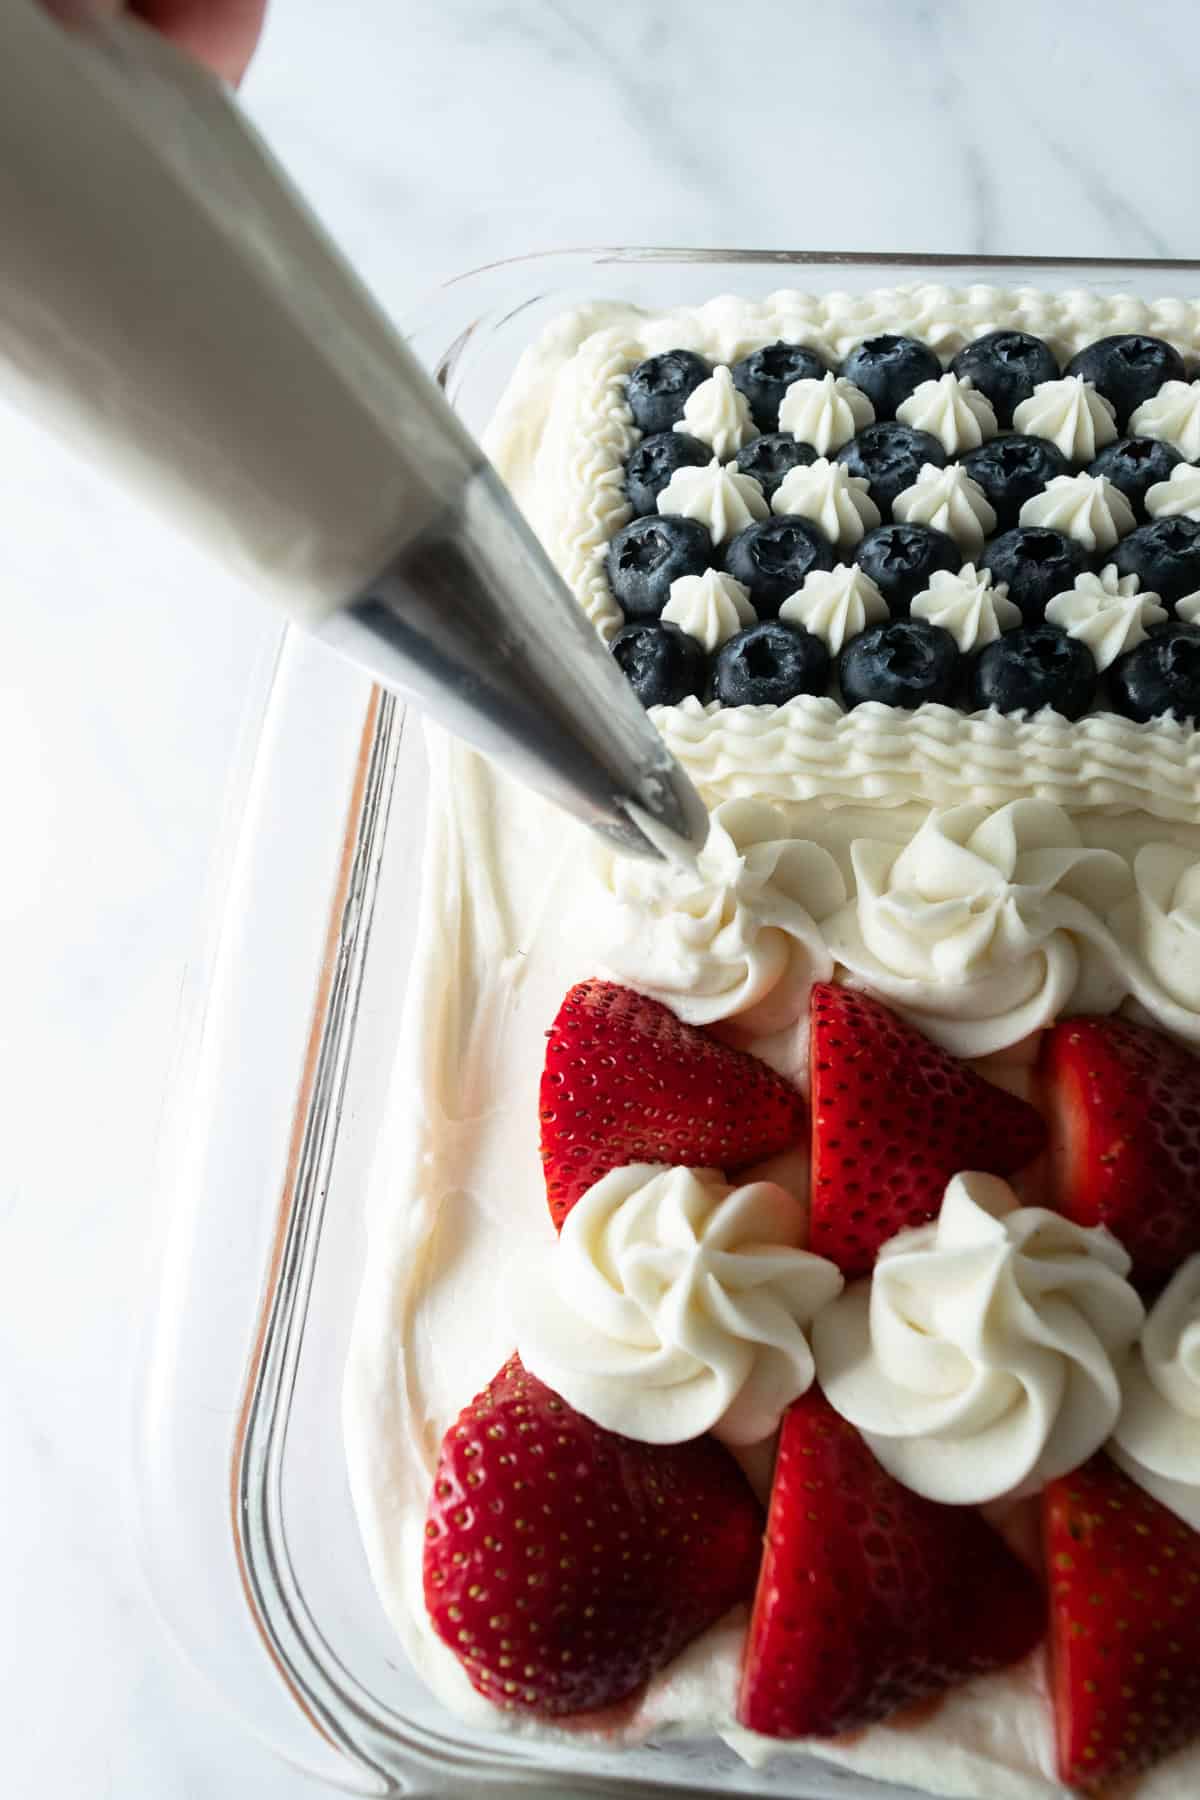 piping stripes onto American flag cake with piping bag.